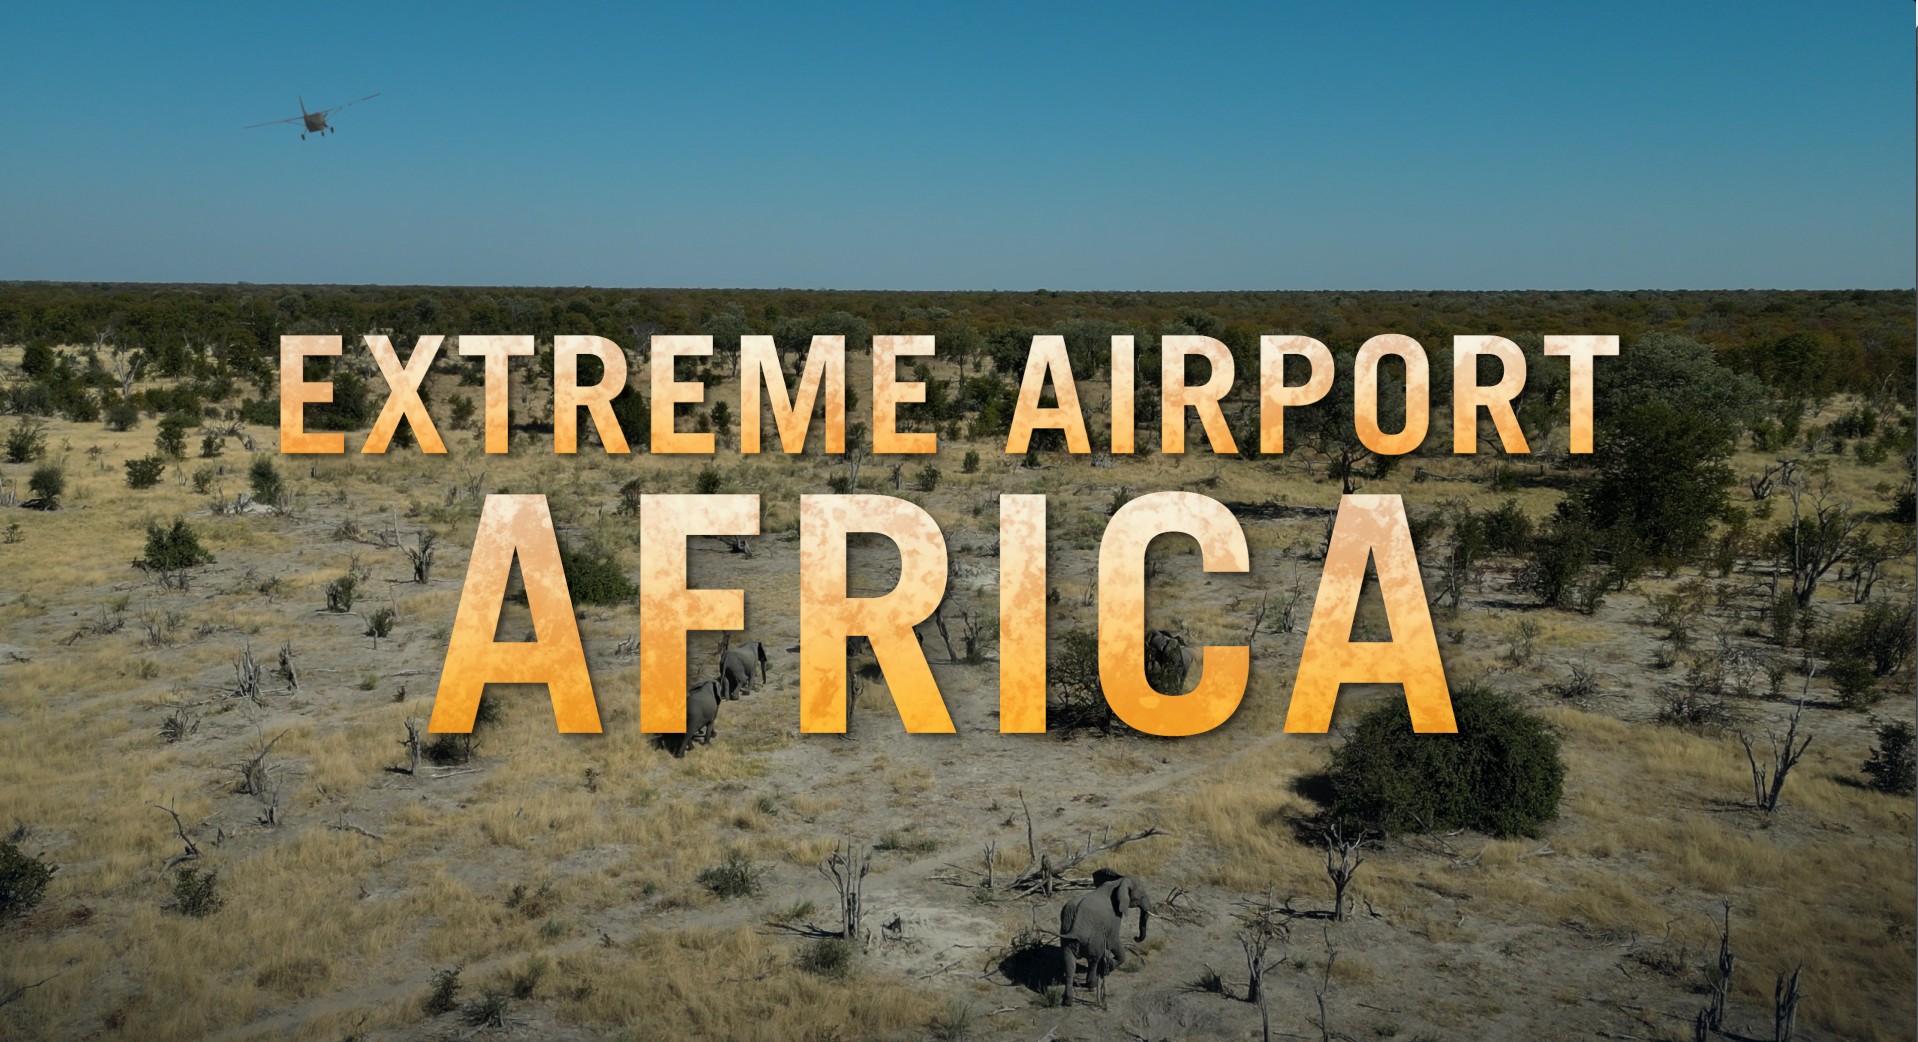 Extreme Airport Africa - Smithsonian 8x60